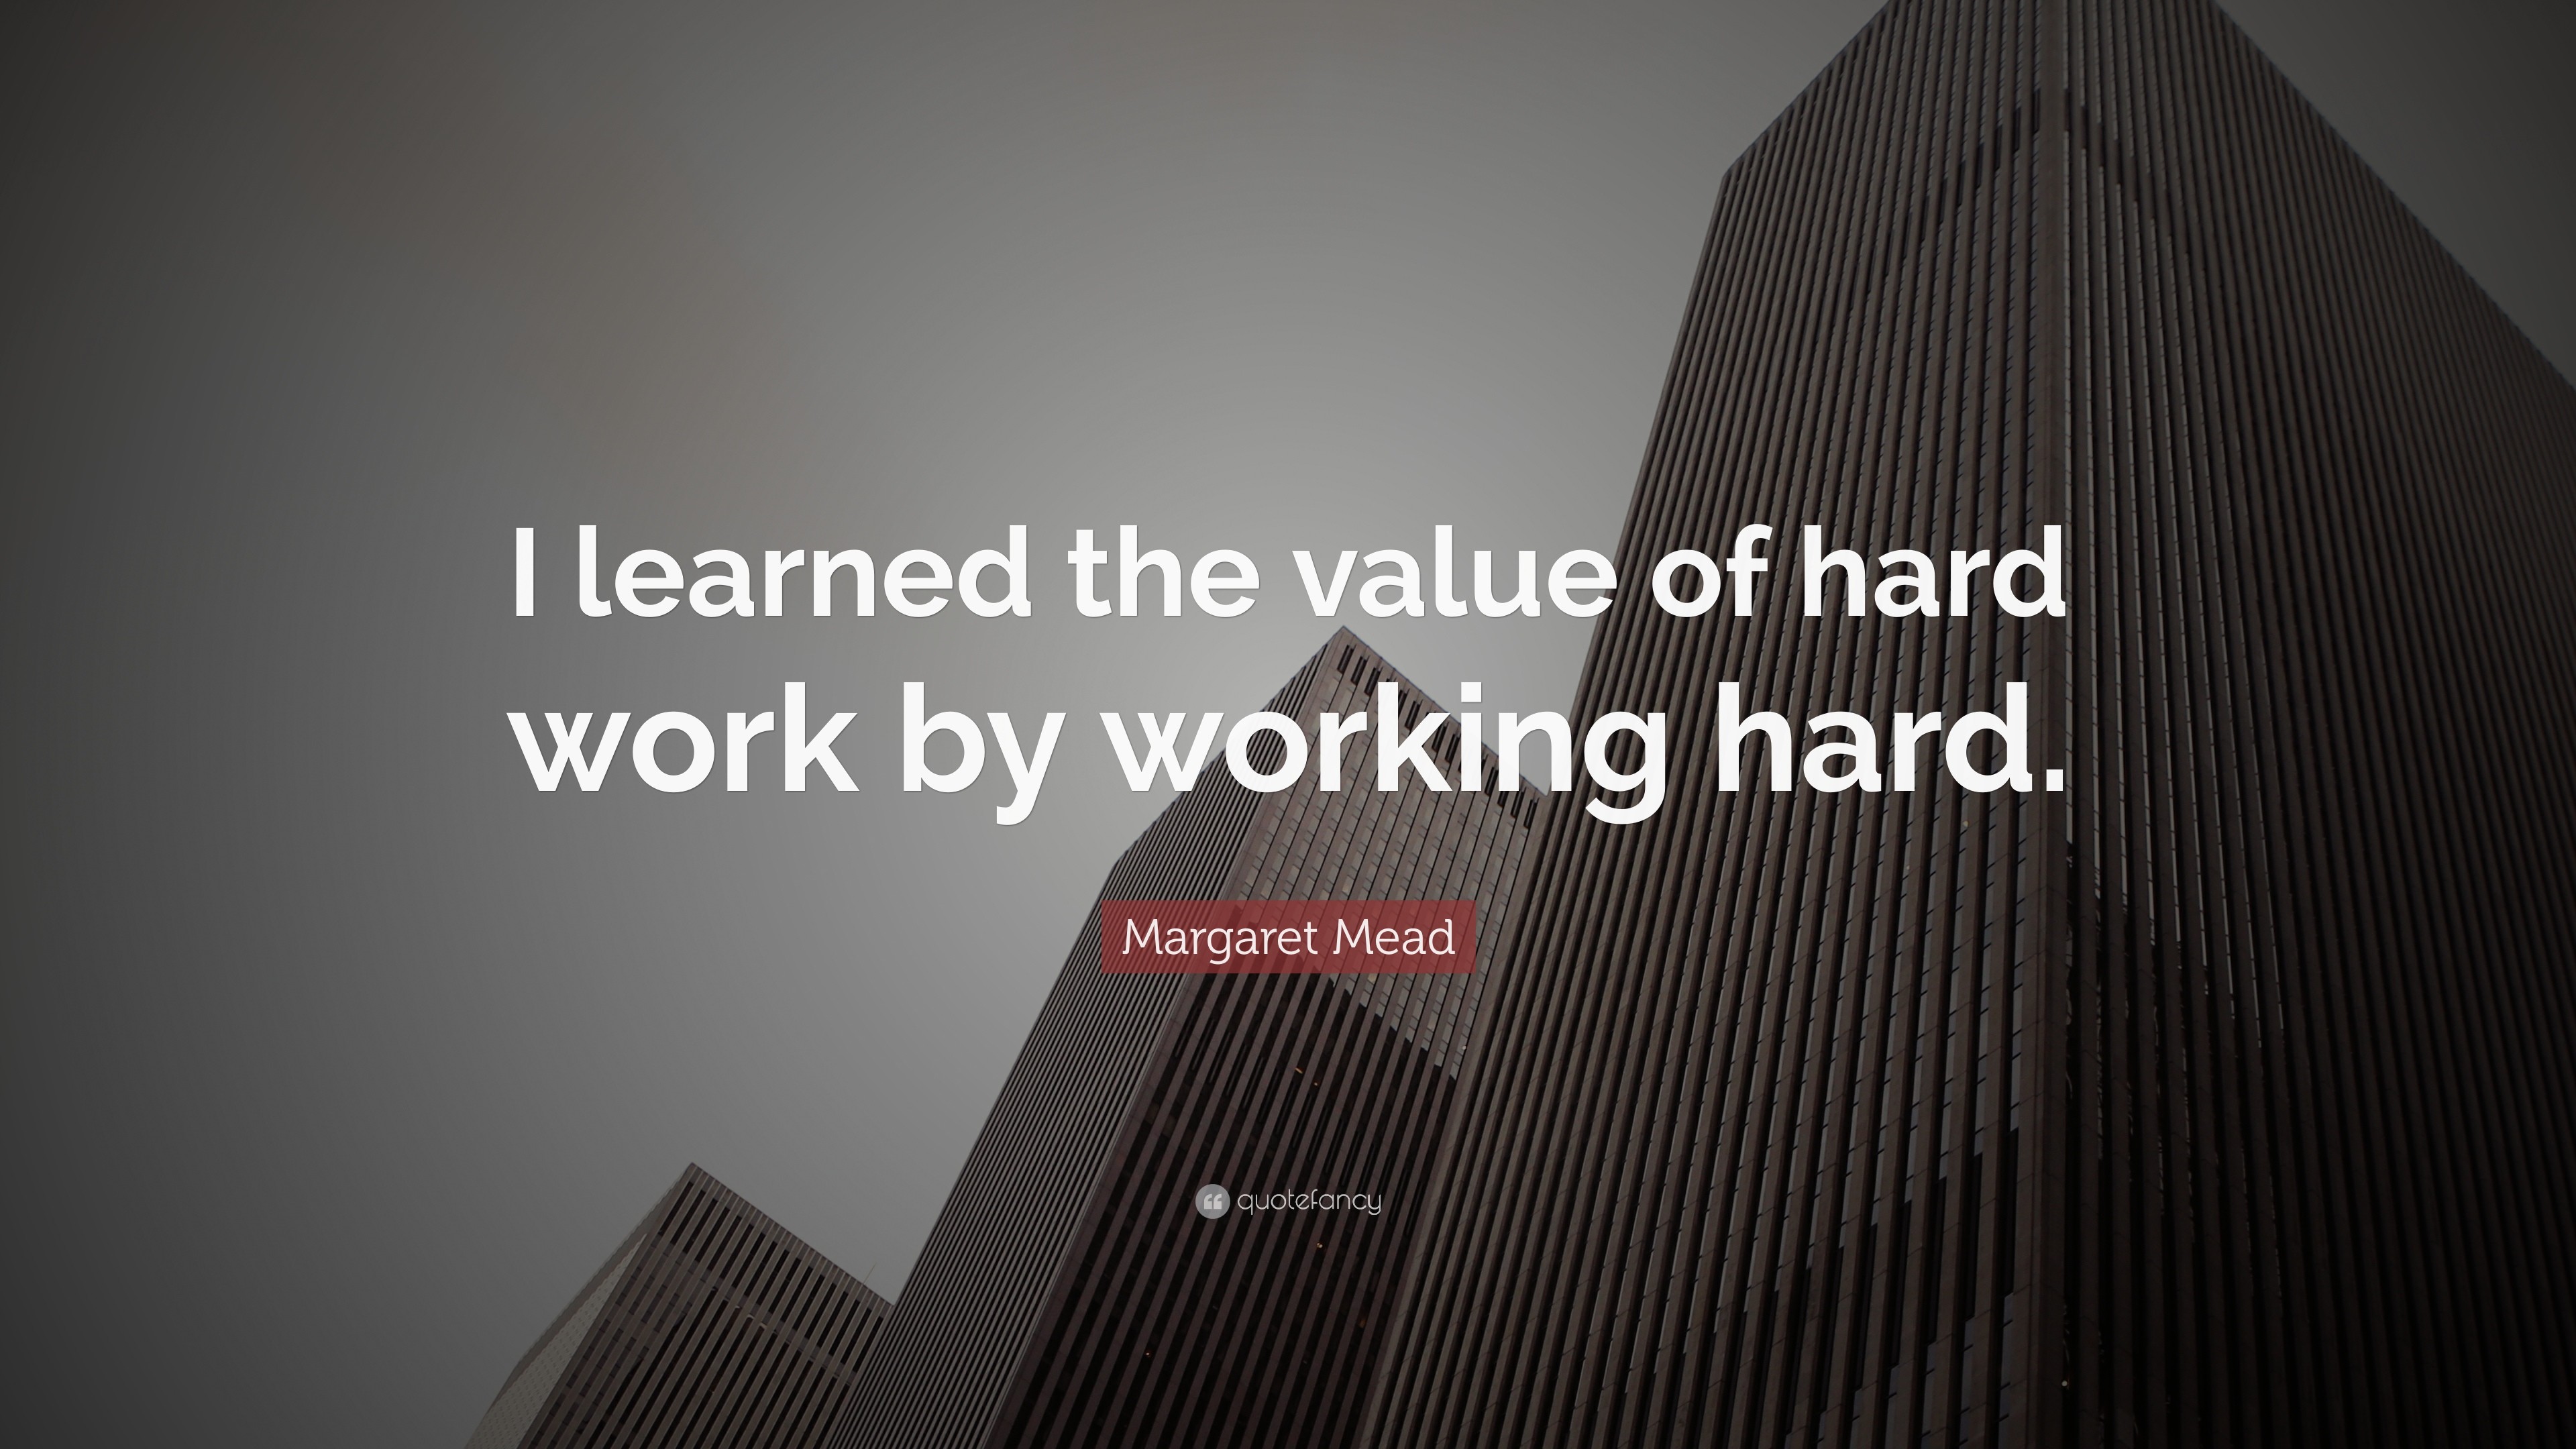 3840x2160 Margaret Mead Quote: “I learned the value of hard work by working hard.